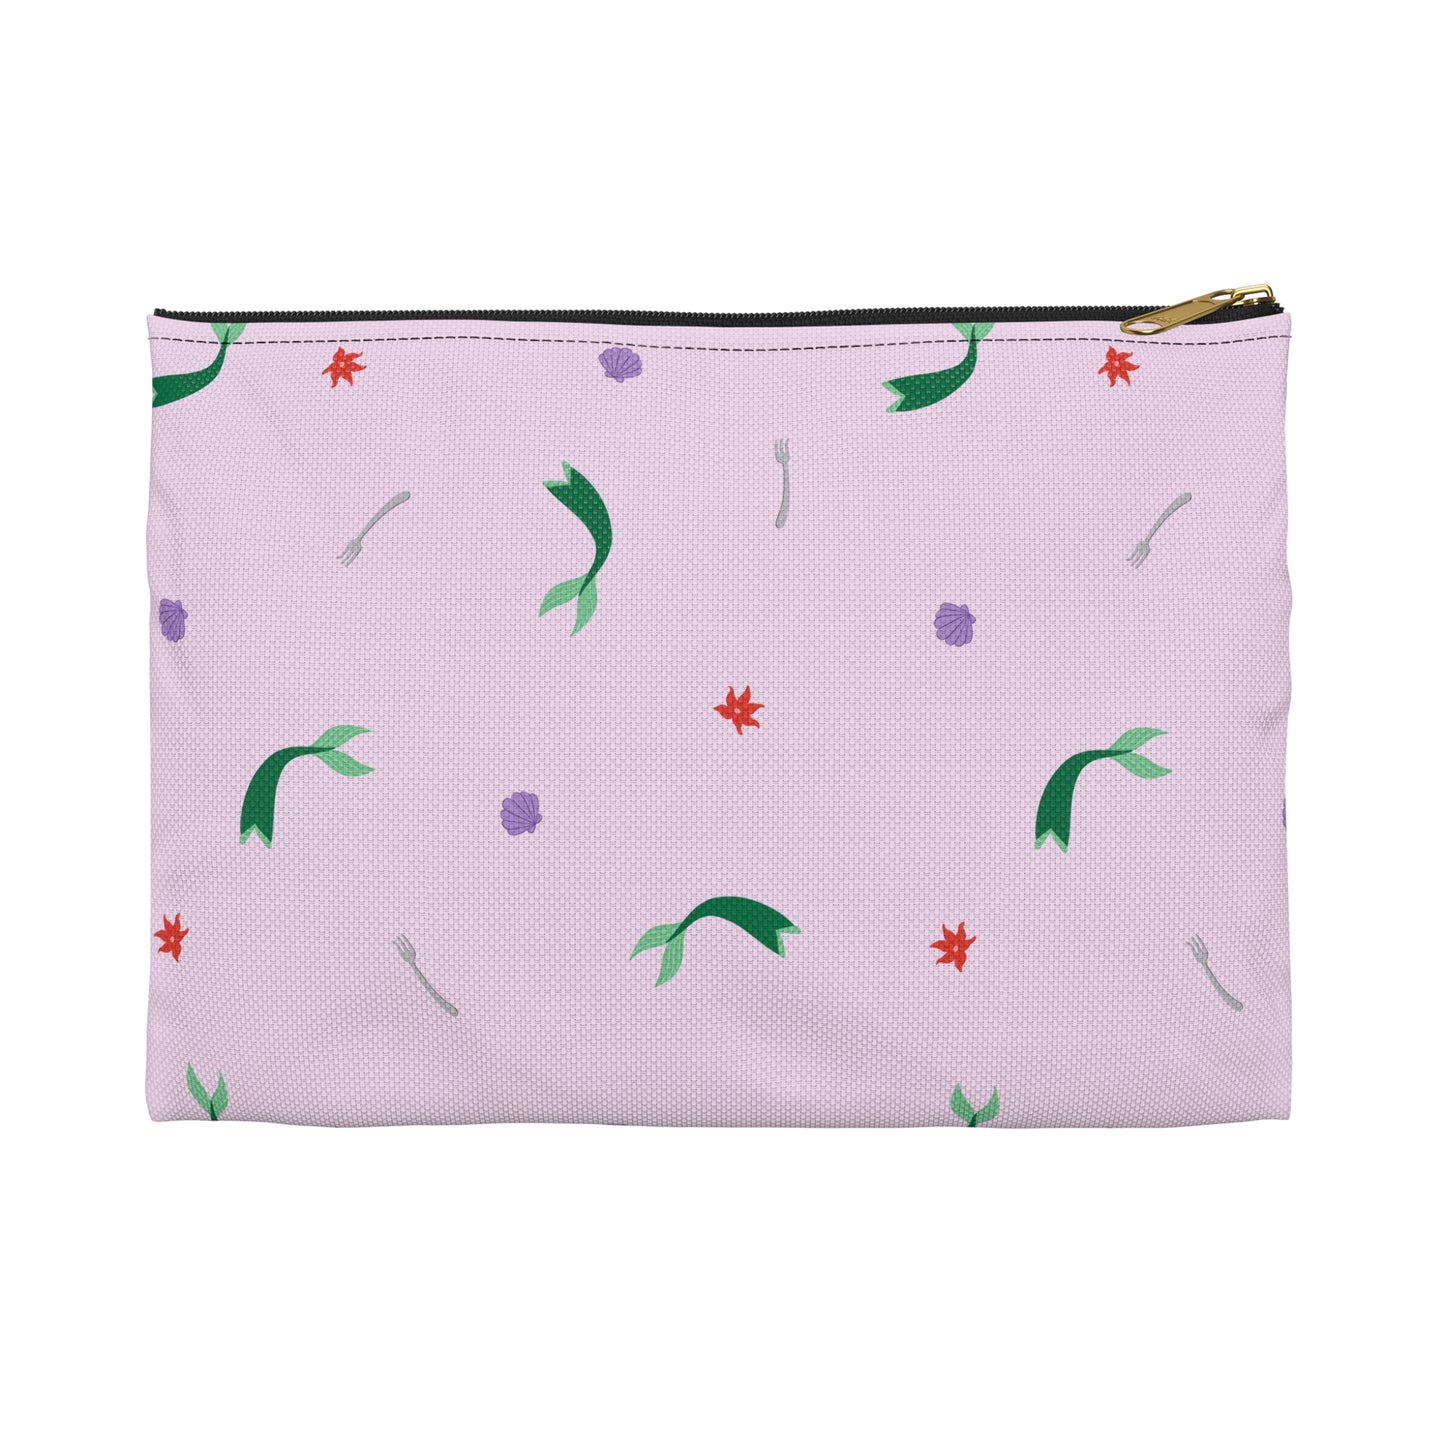 Ariel's Favorite Things - Little Mermaid Inspired - Accessory Pouch